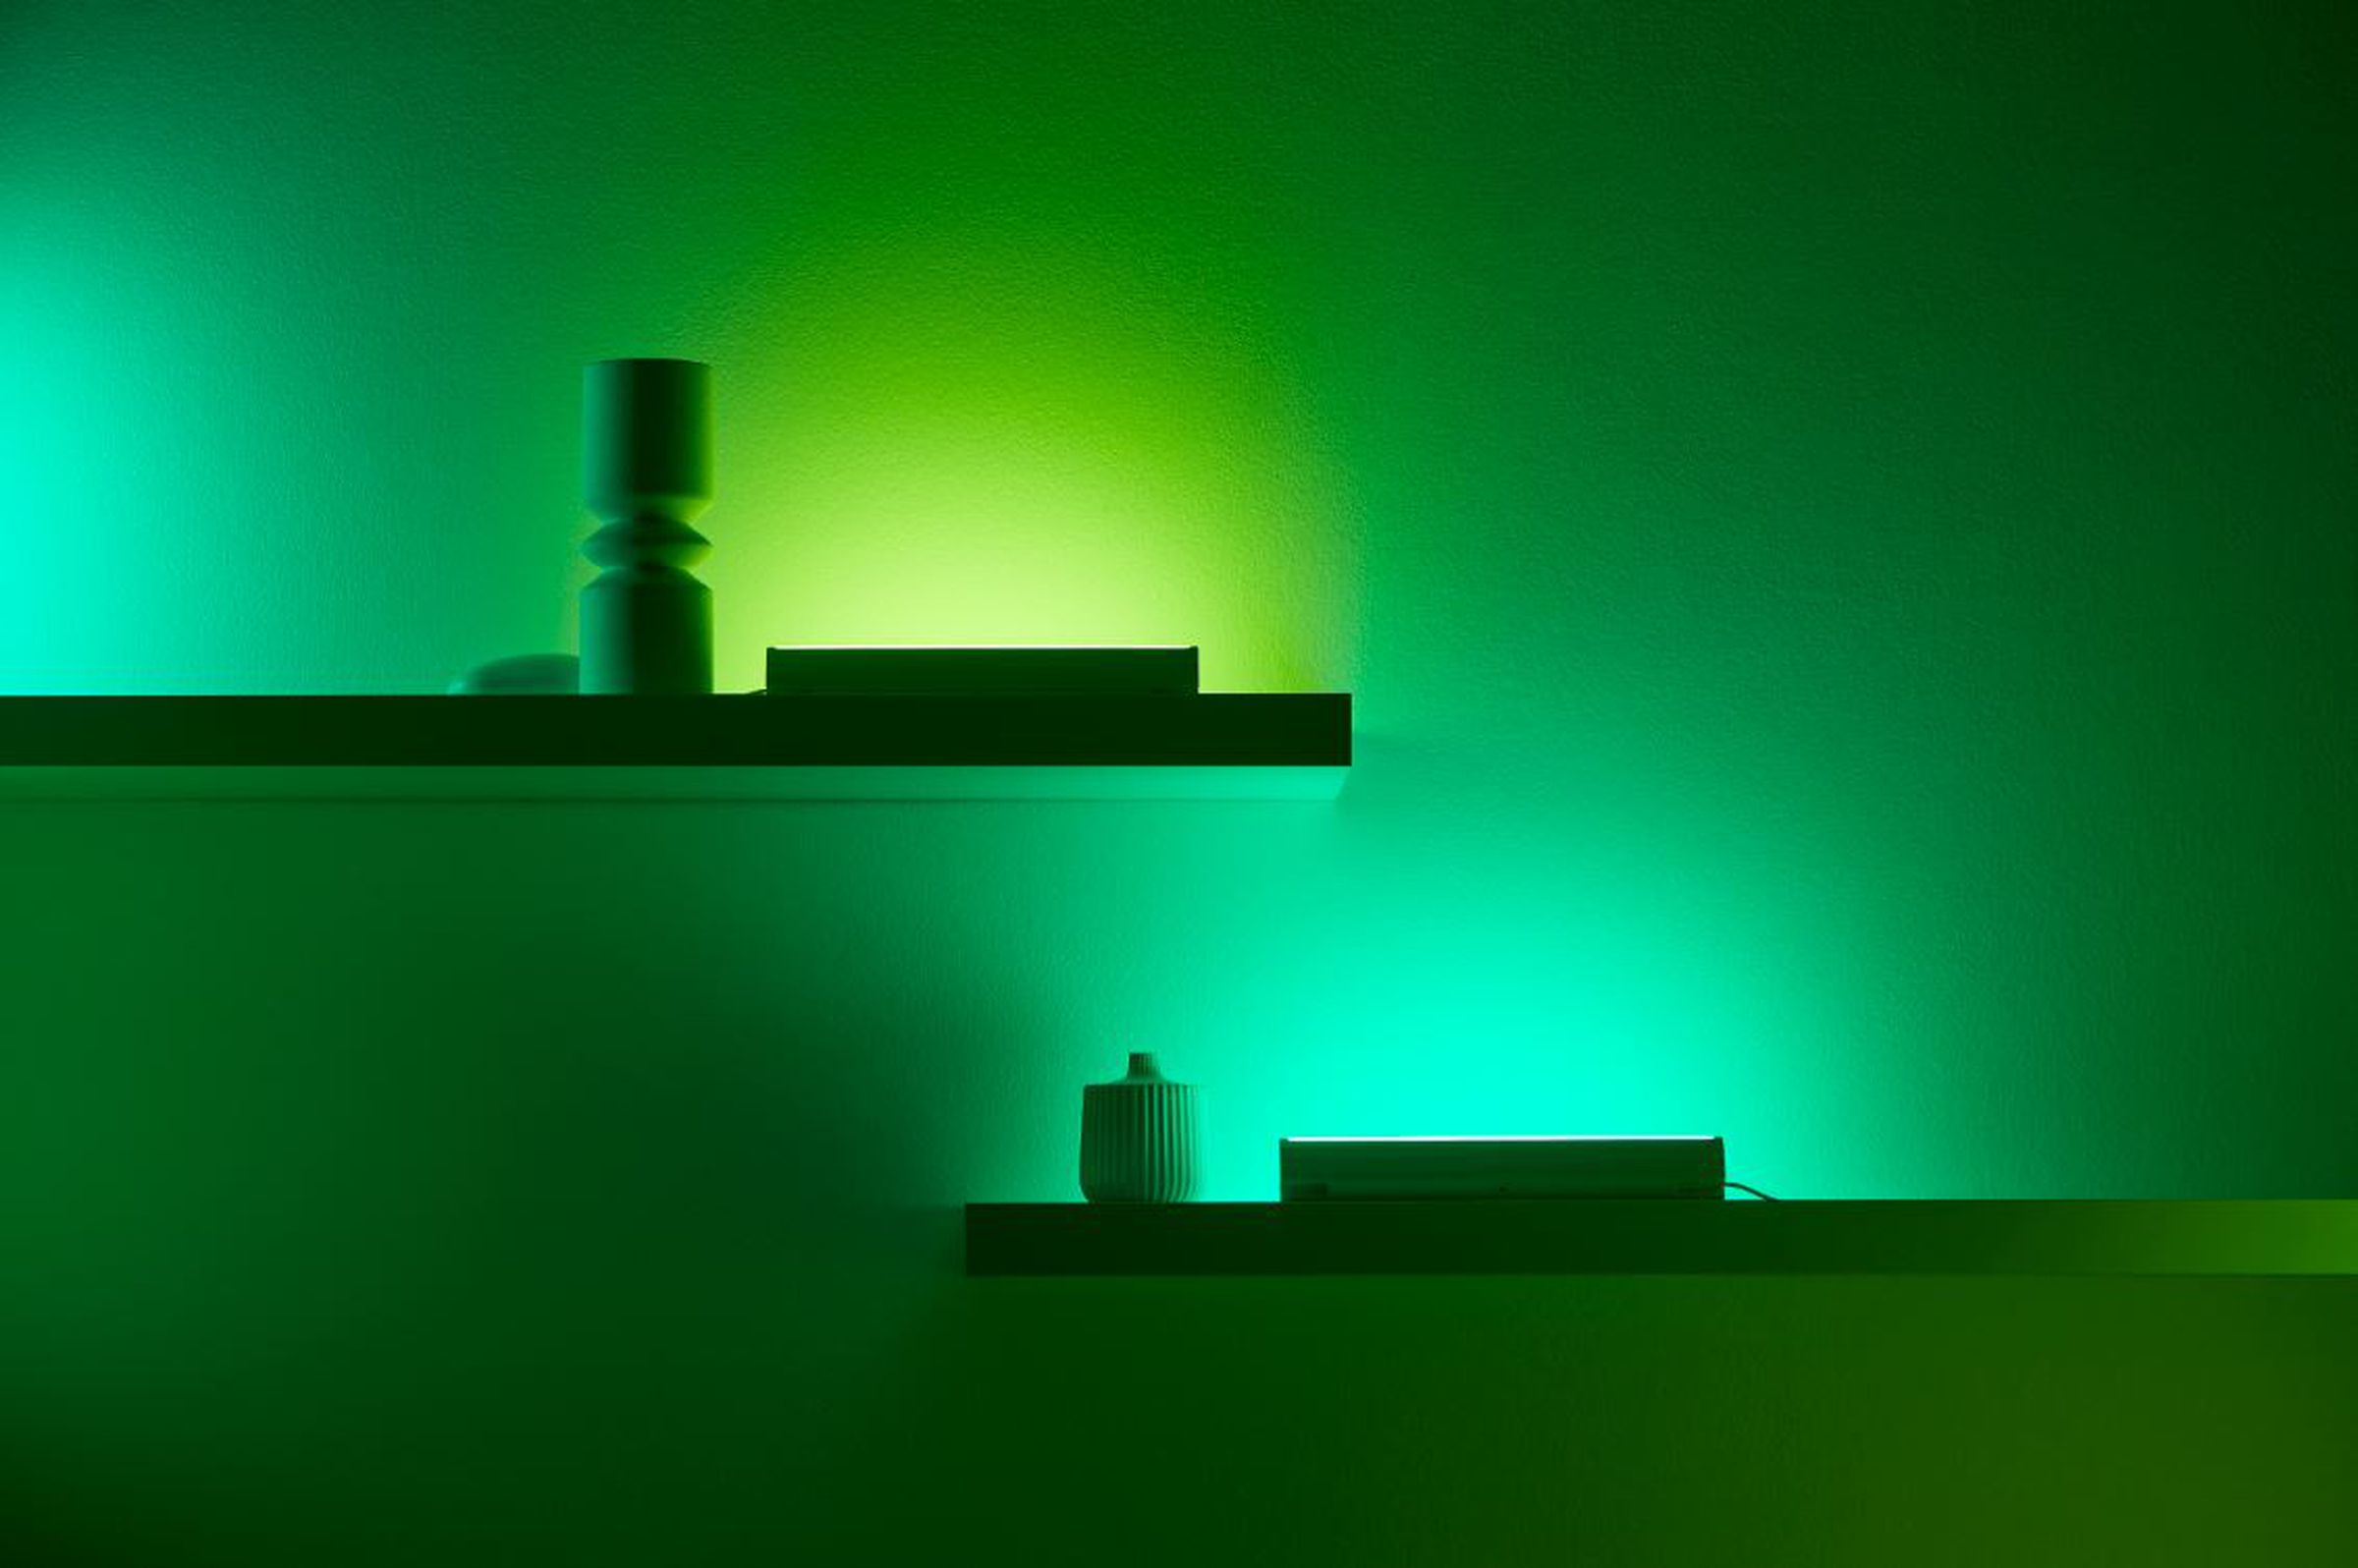 New WiZ light bars can sit flat on a table or shelf for ambient light effects.